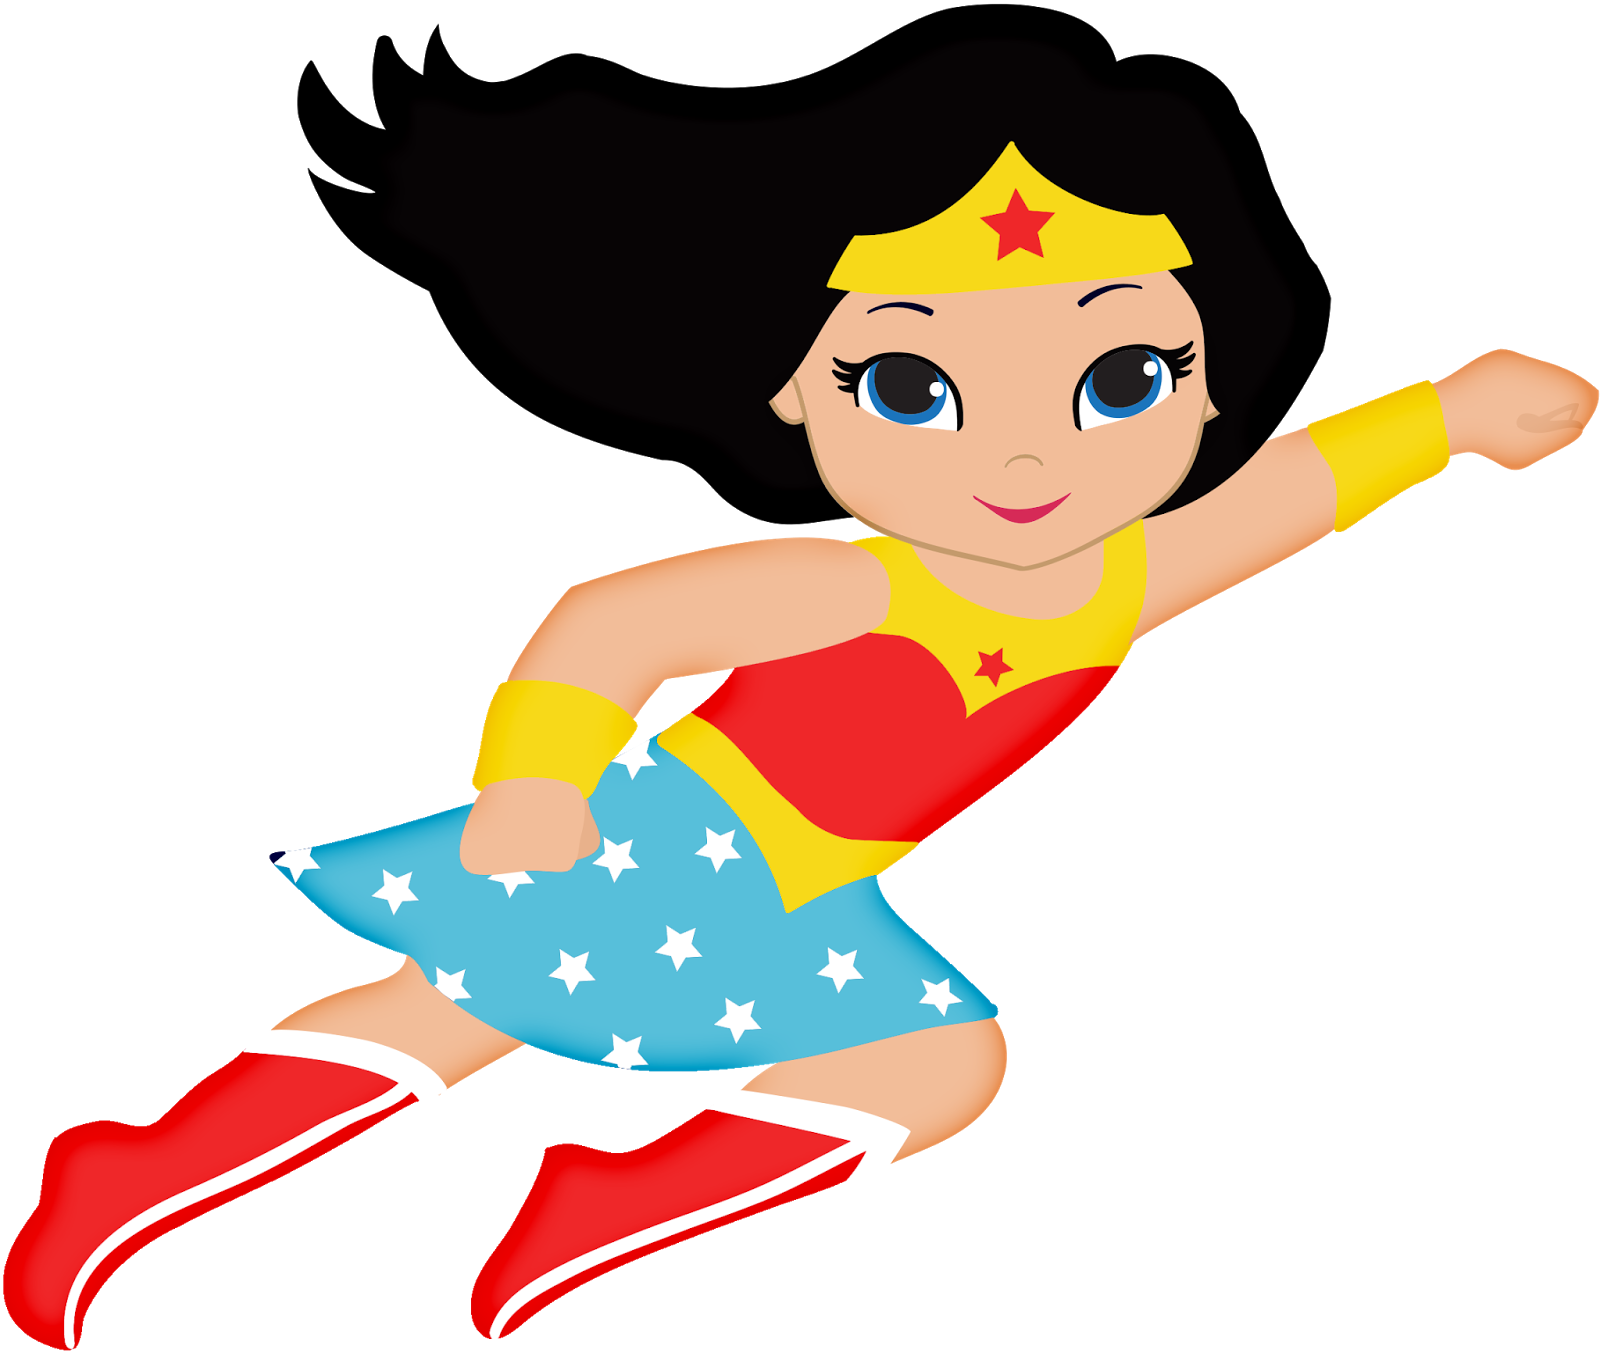 Wonder Woman Baby Clipart. - Oh My Fiesta! for Geeks